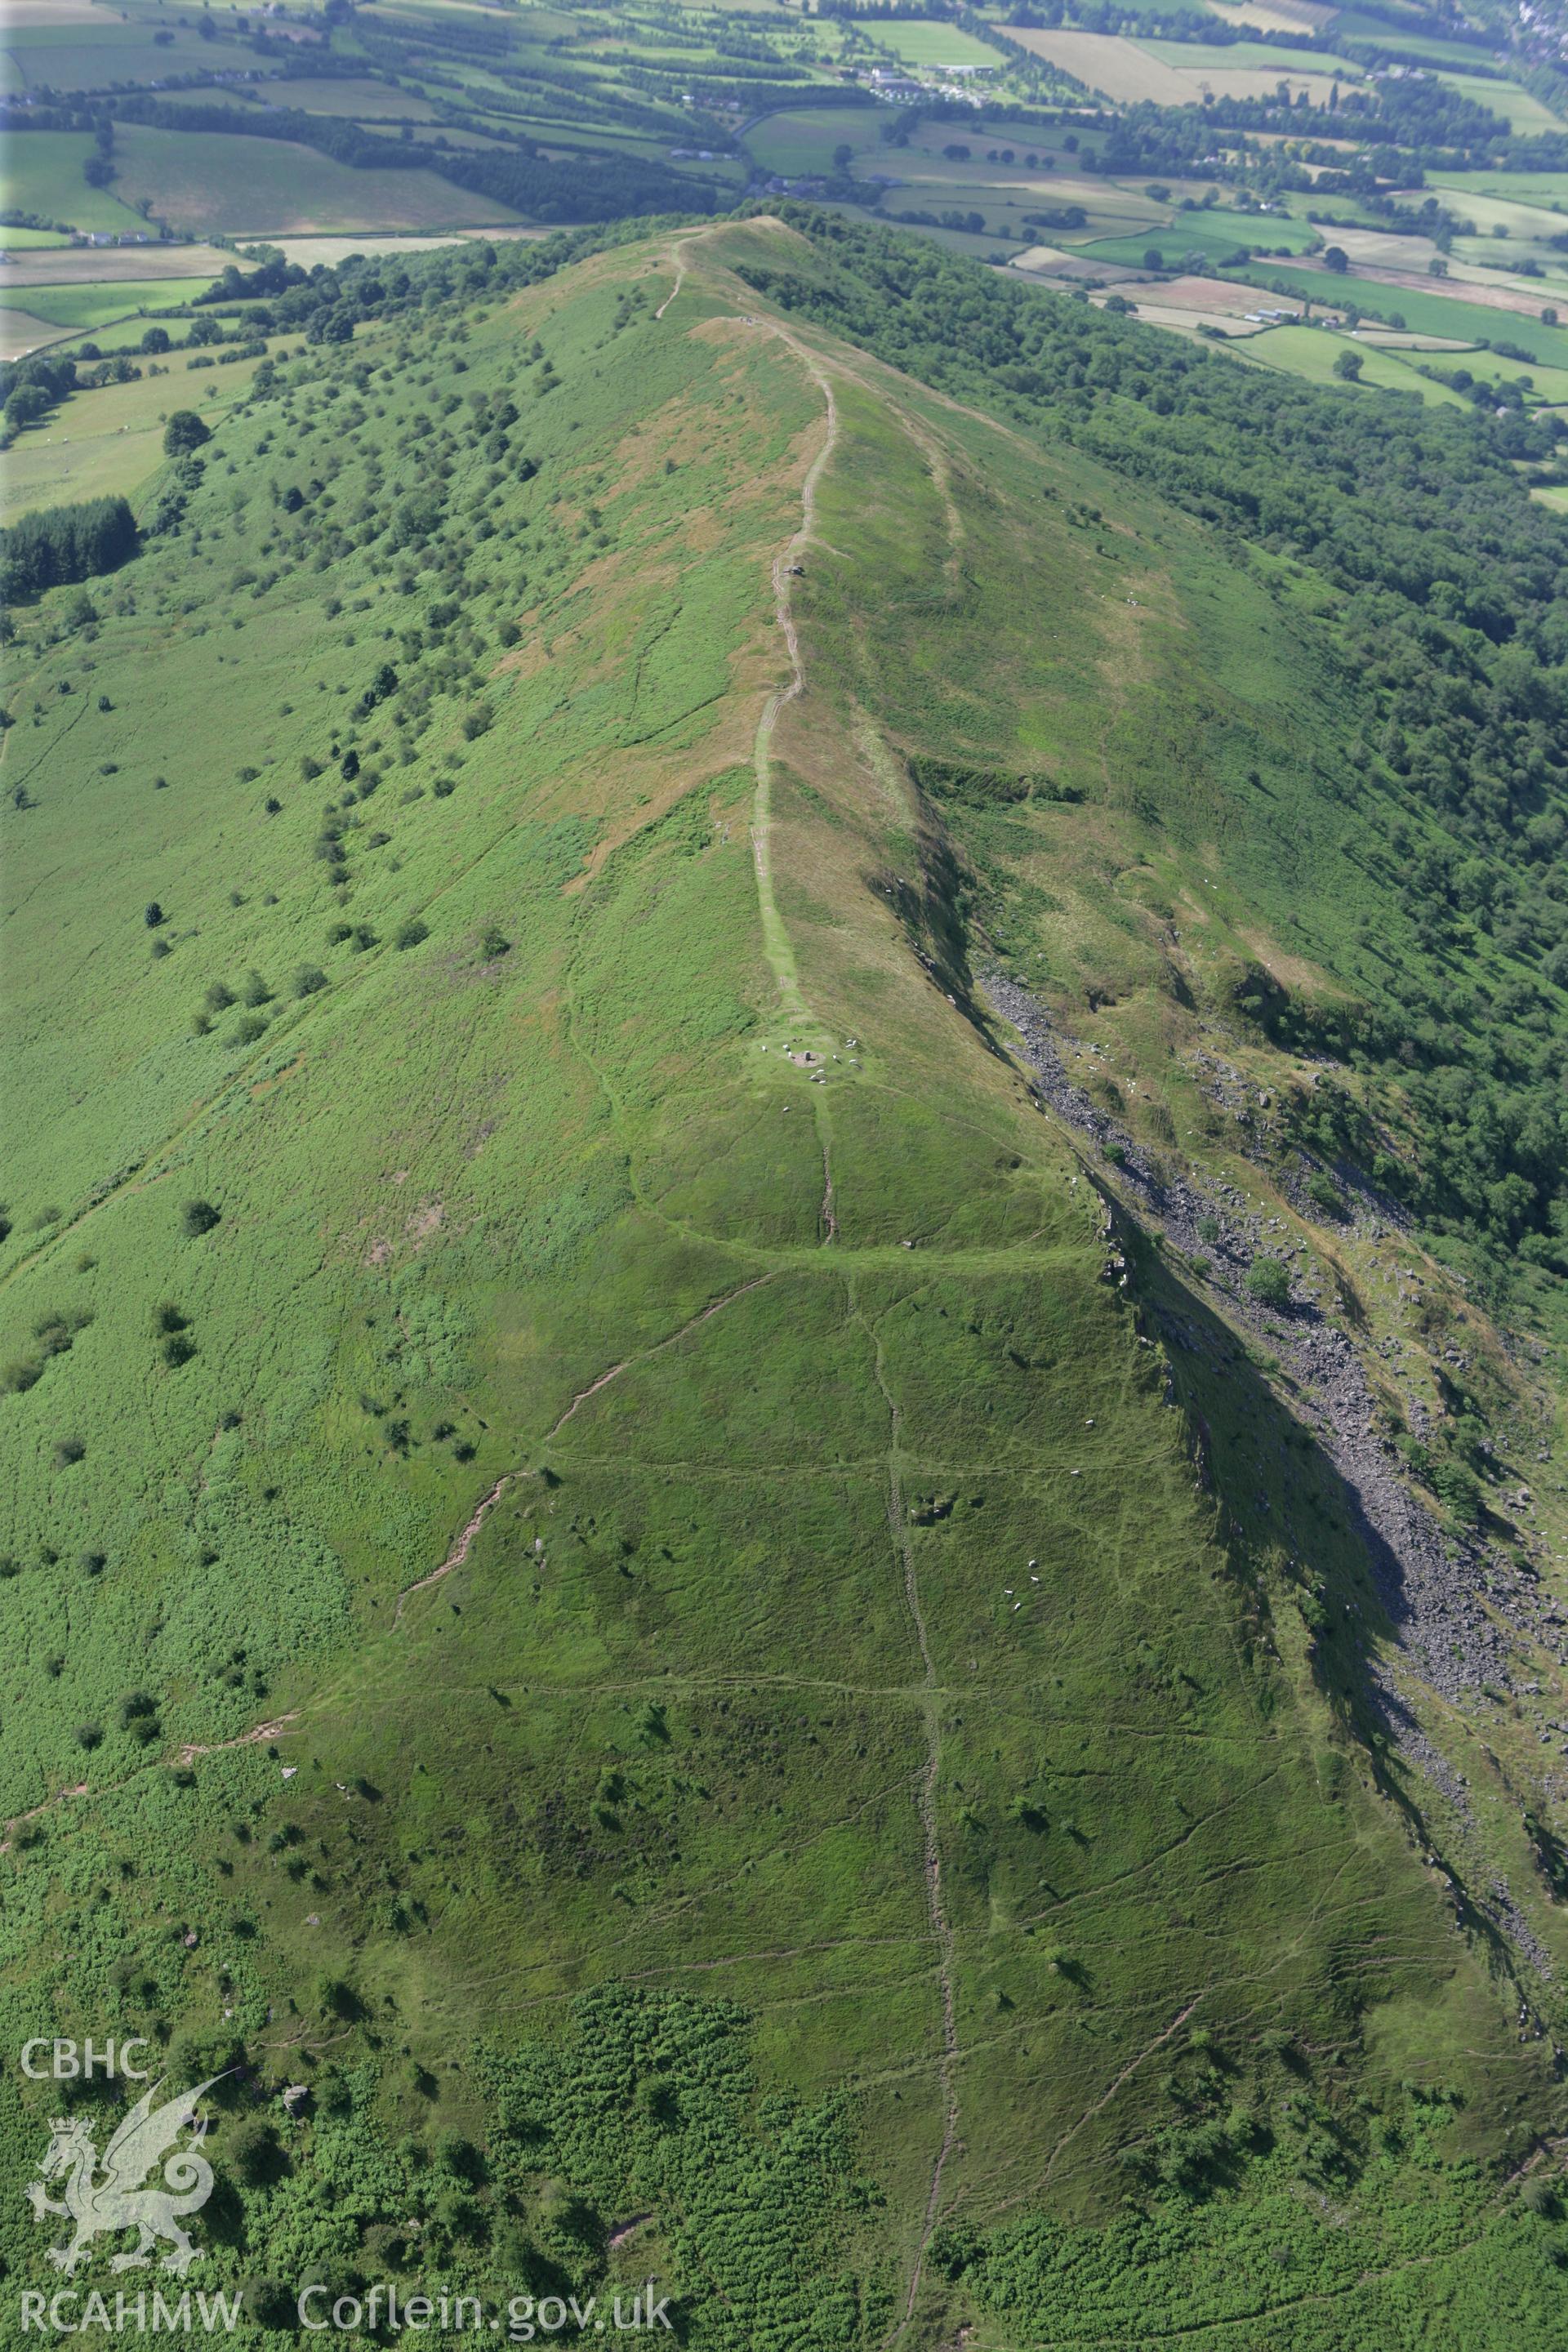 RCAHMW colour oblique photograph of Skirrid Fawr, remains of St Michael's Chapel and Skirrid Fawr Defended Enclosure, from the north. Taken by Toby Driver on 21/07/2008.